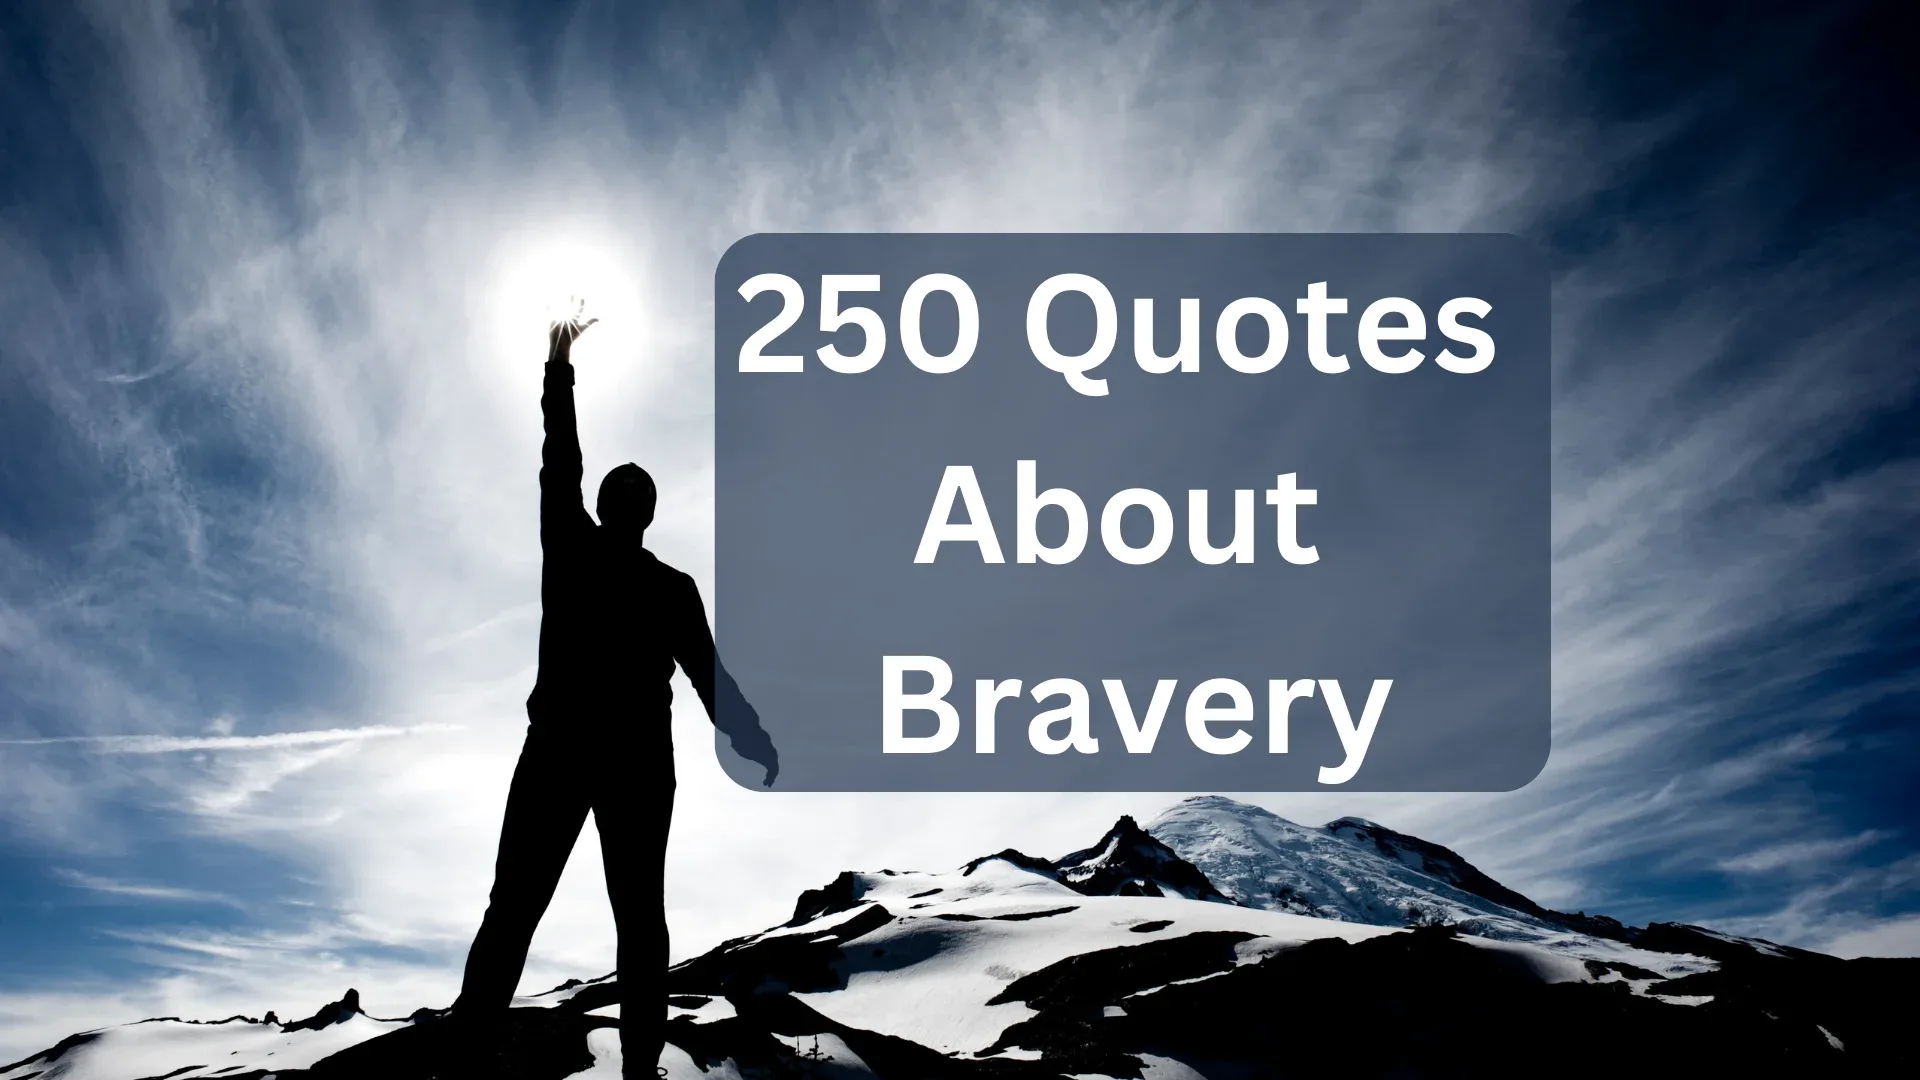 Oprah Winfrey quote: Bravery shows up in everyday life when people